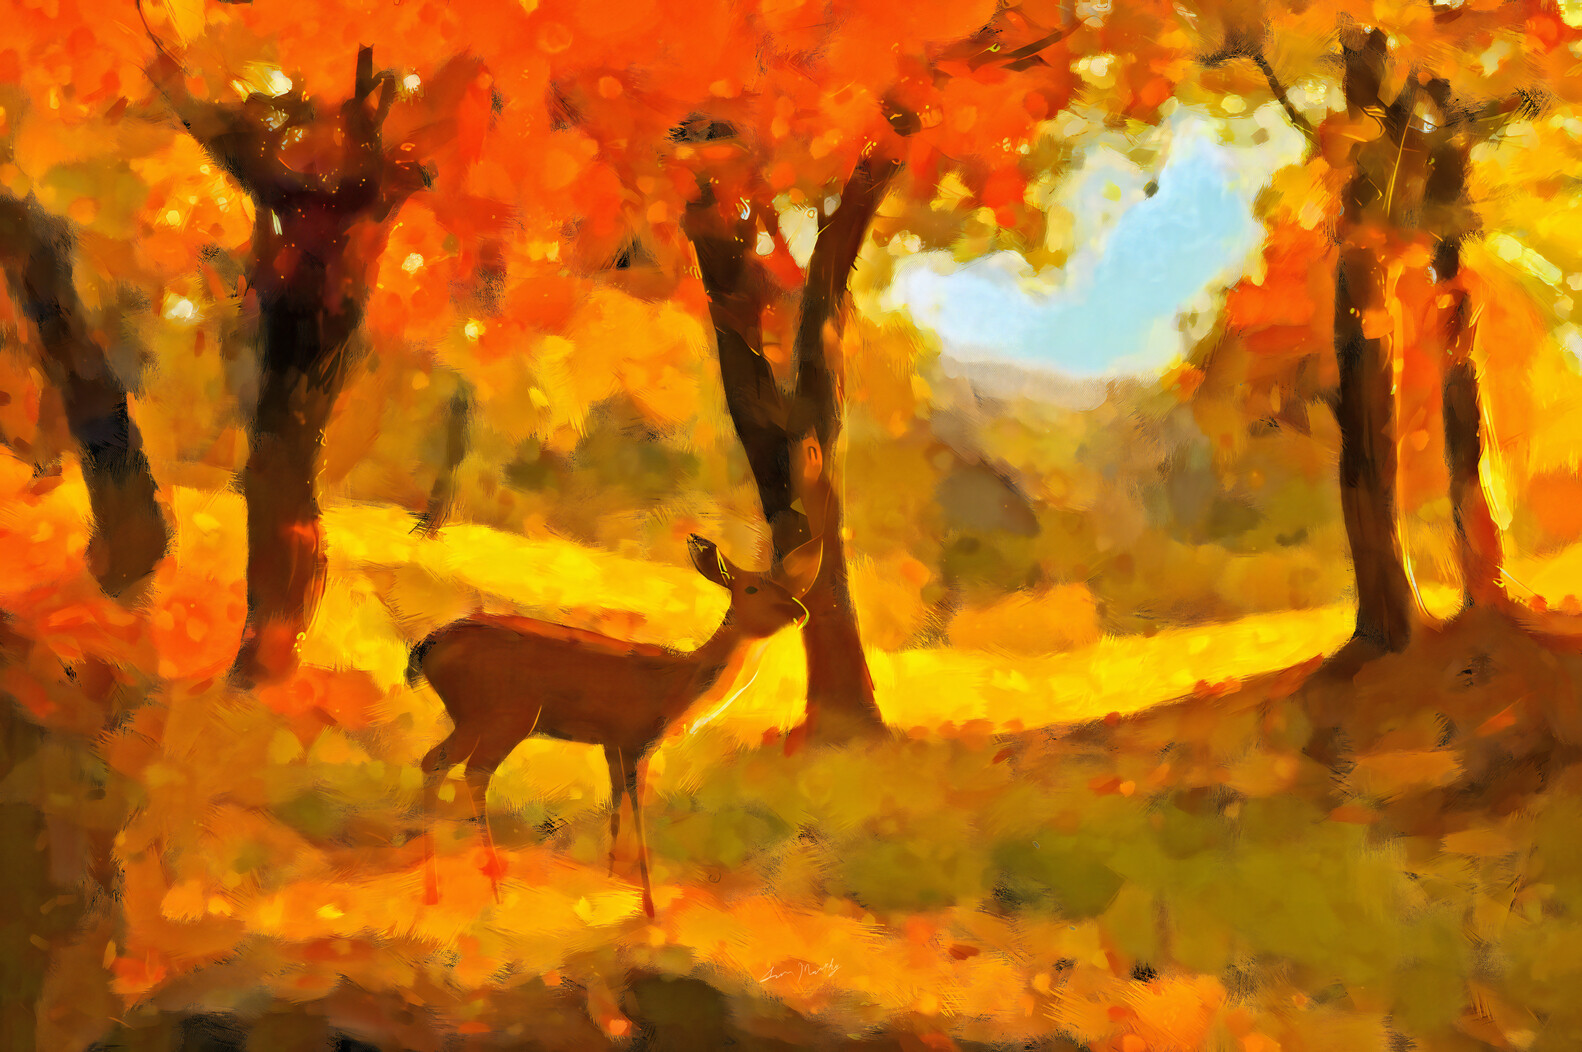 "Deer in the Autumn Forest" Digital Paint on Ink Mixed Media Experiment